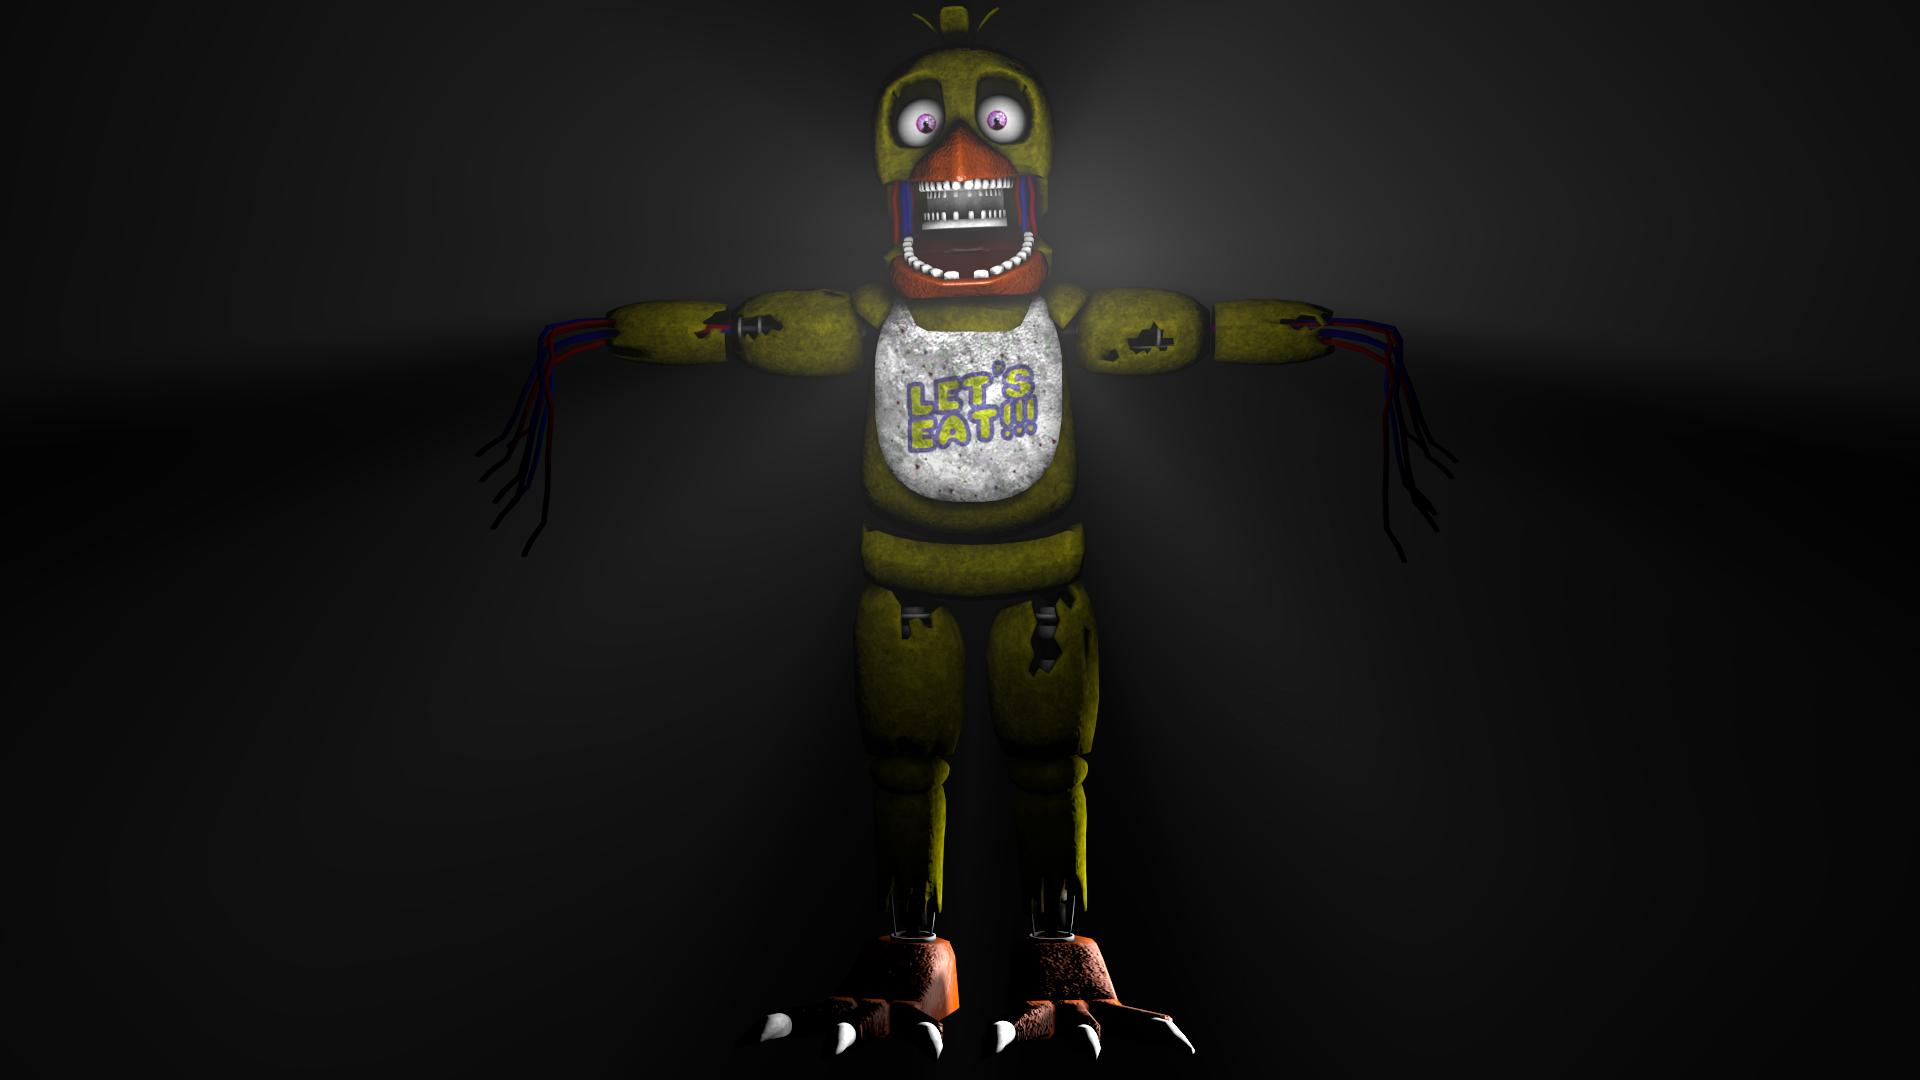 Withered Chica by Mistberg on DeviantArt